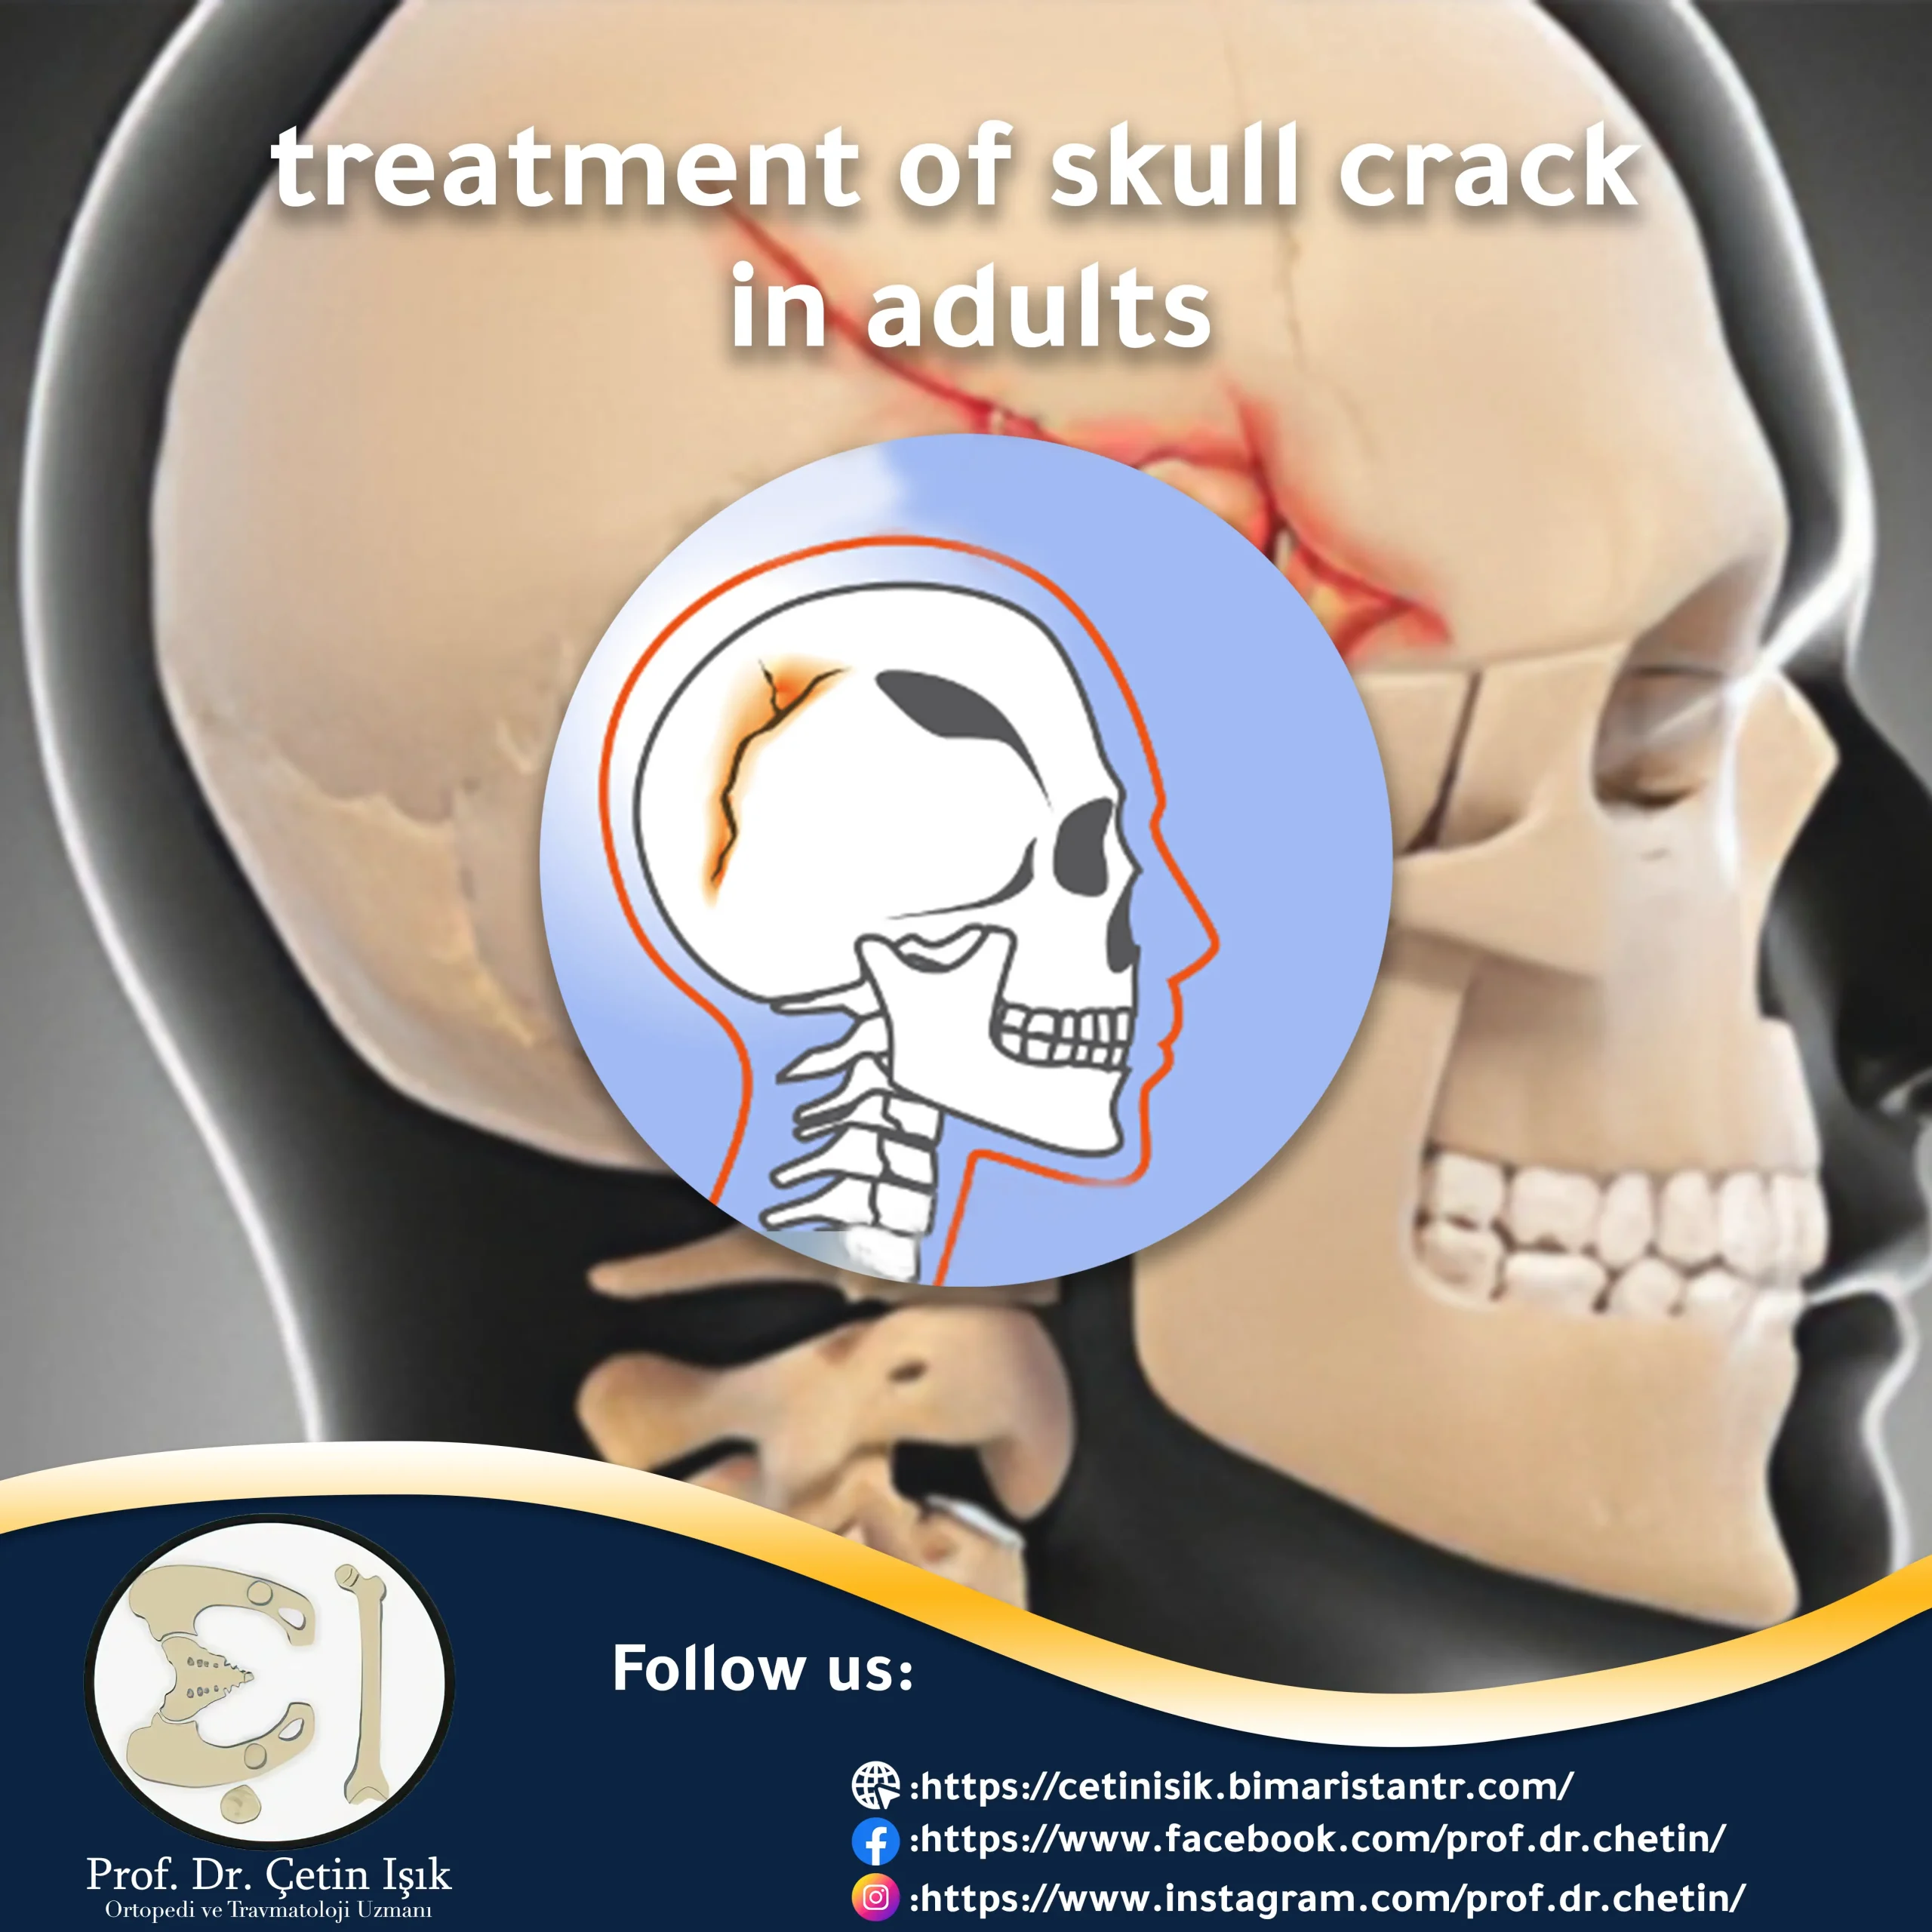 Treatment of skull fracture in adults step by step